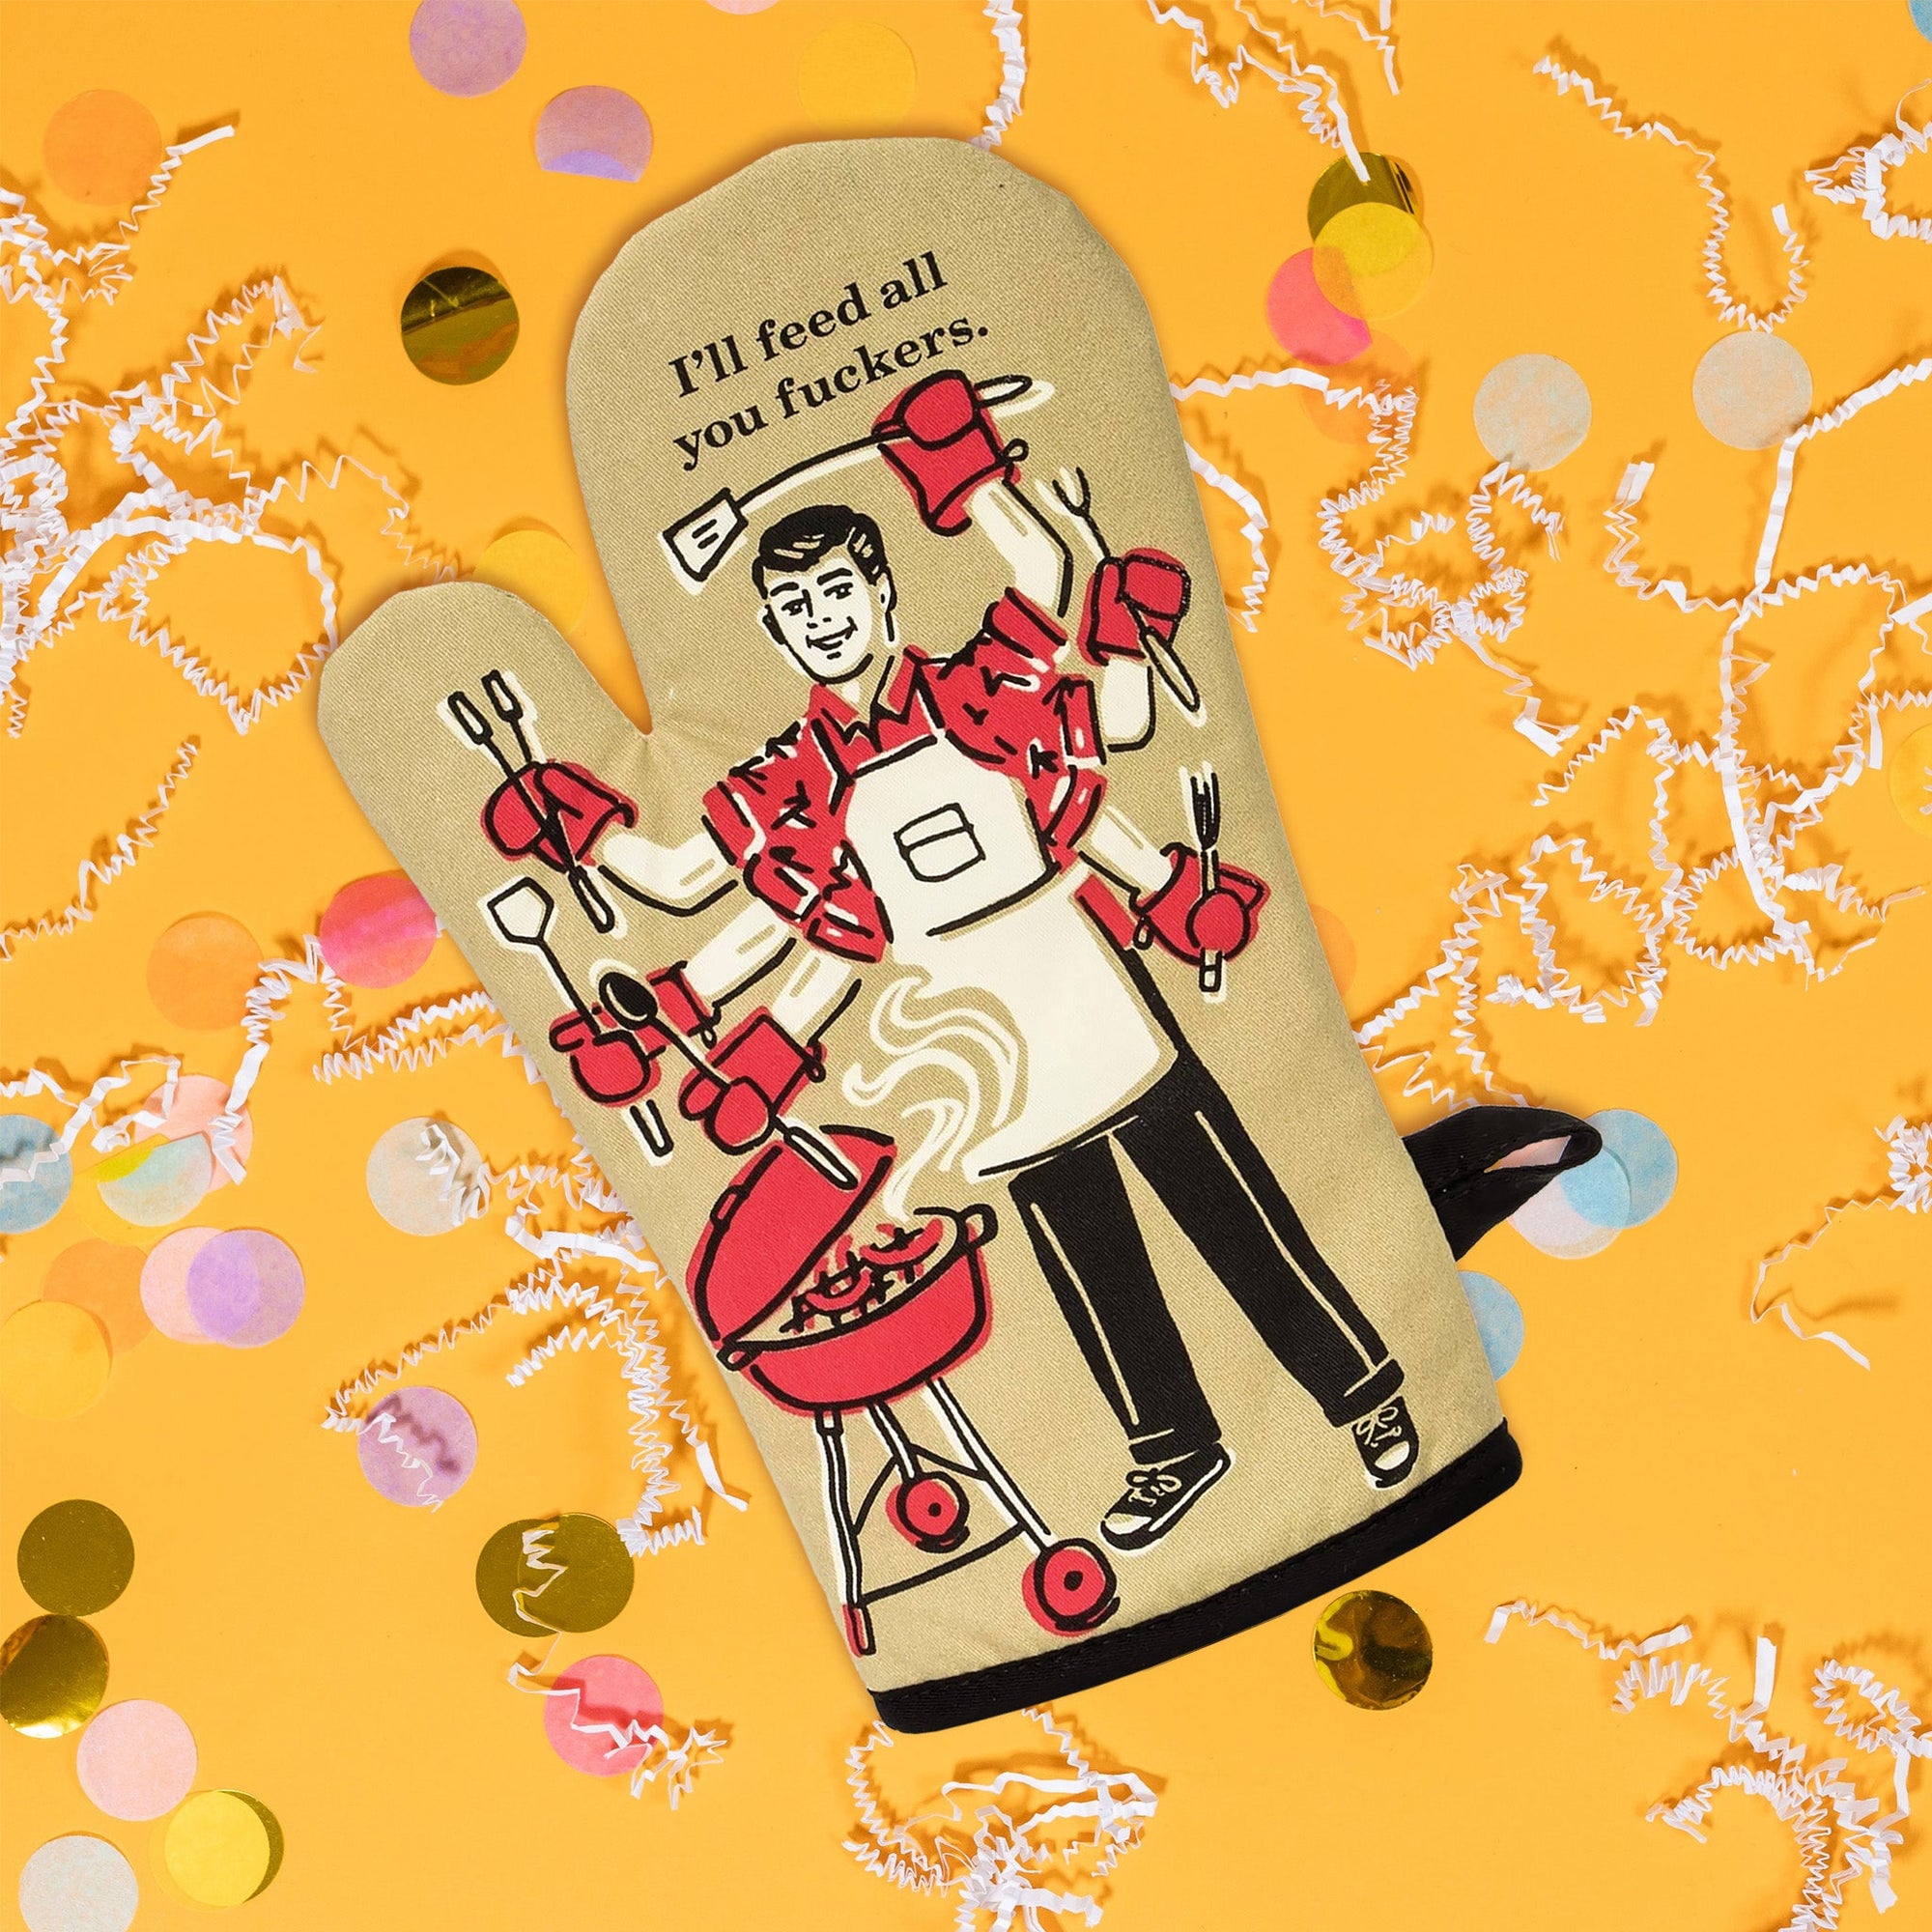 On sunny mustard background sits an oven mitt with white crinkle and big, colorful confetti scattered around. The front of this khaki oven mitt has a vintage illustration of a man barbequing with six arms and hands. In each hand are bbq utensils. The colors are khaki, red, black, and white. At the top it says "I'll feed all you fuckers." in black serif font.